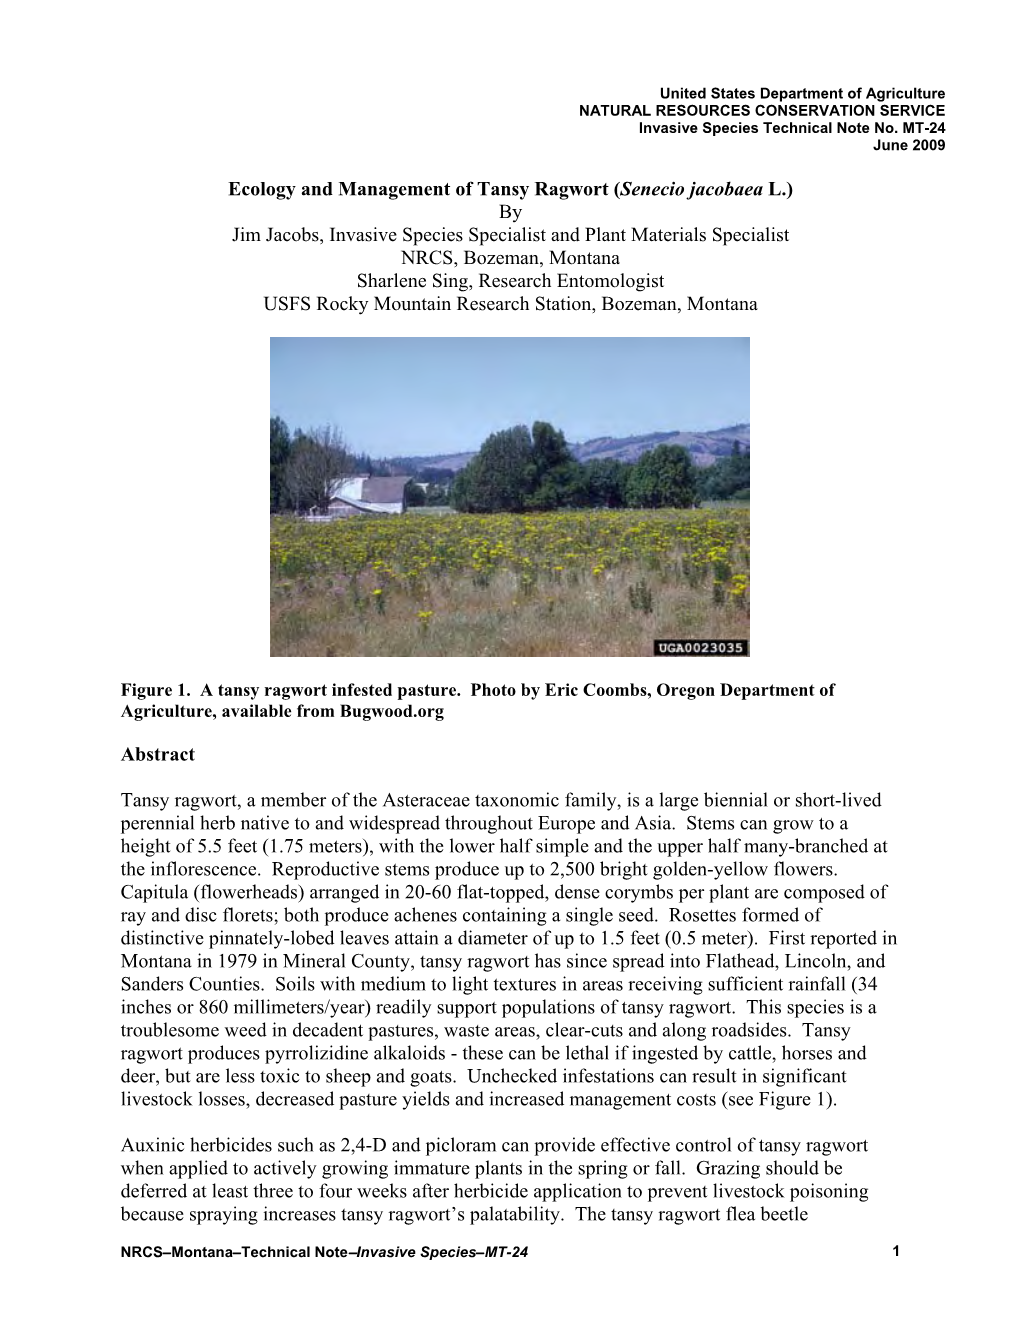 Ecology and Management of Tansy Ragwort